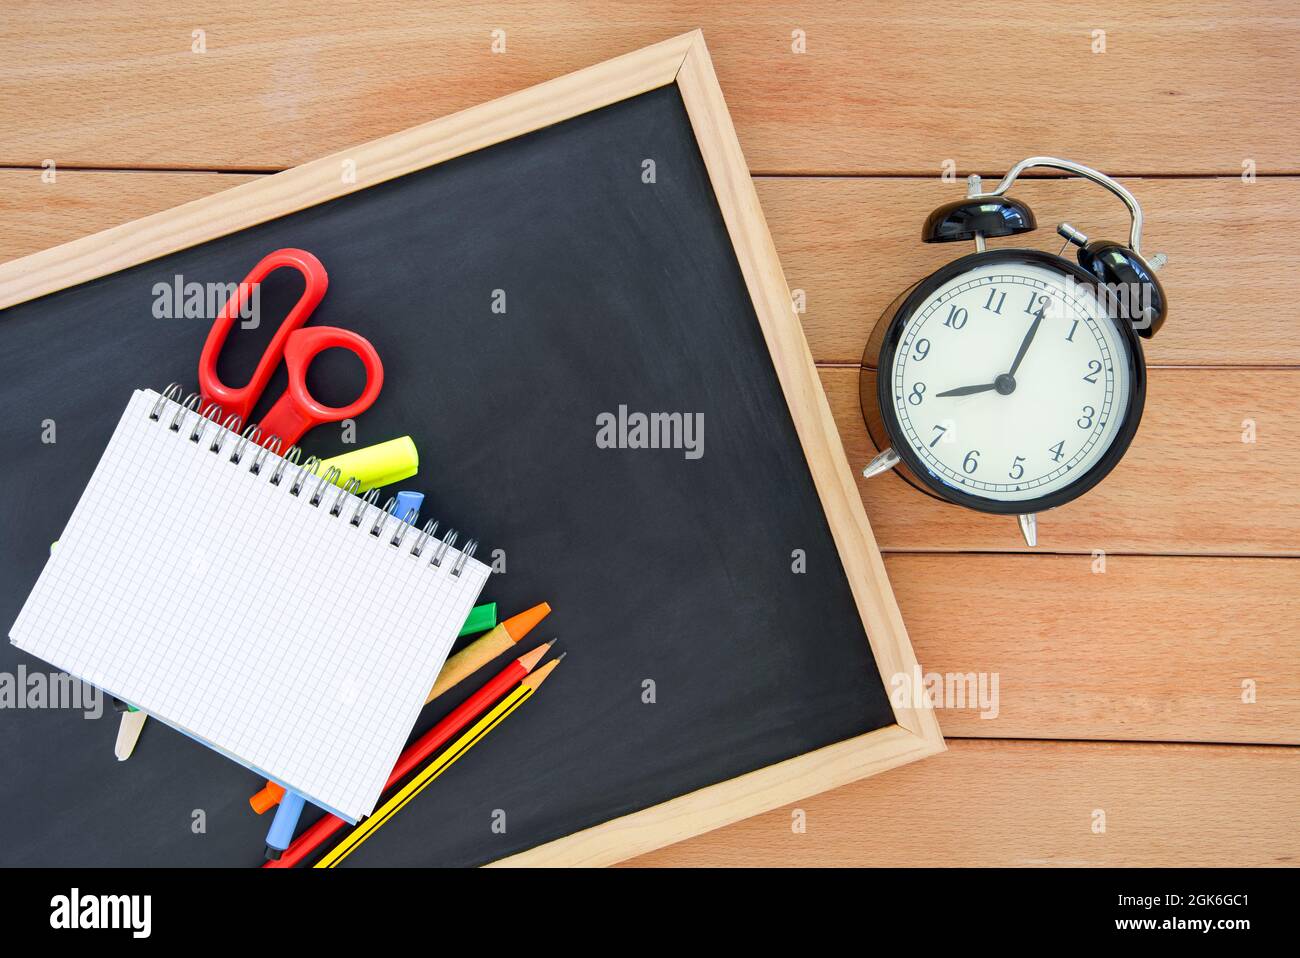 Open notebook and colourful school suplies on a small blackboard lying on a wooden table near an alarm clock. Copy space. Back to school concept. Stock Photo